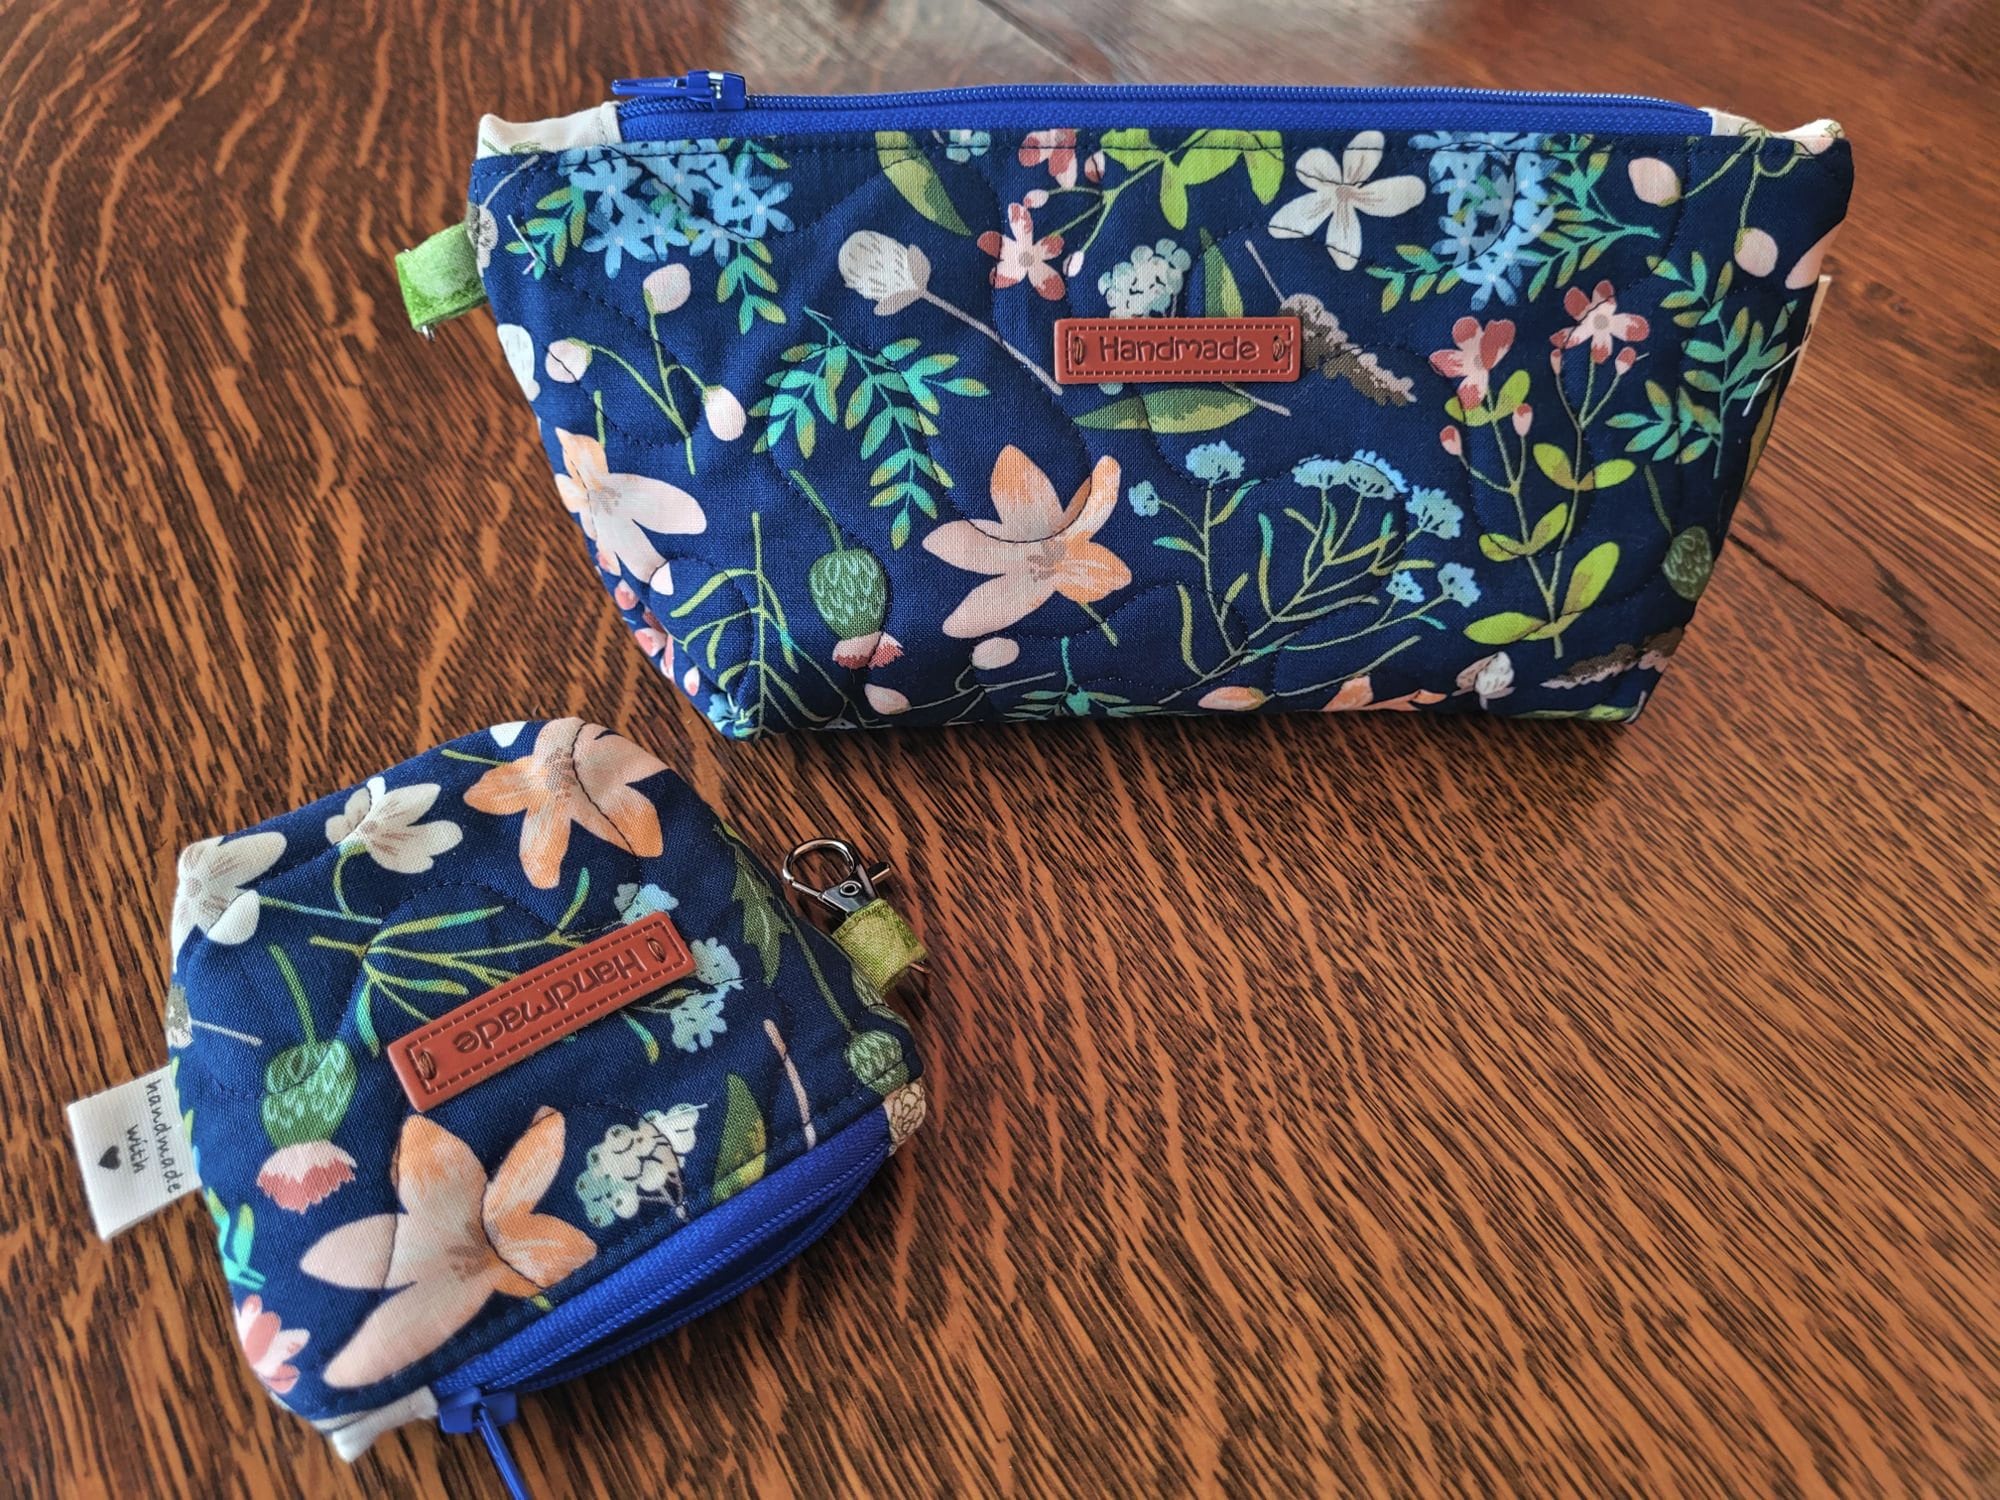 Small Zipper Pouch Set | Quilted Makeup Cosmetic Bag | Travel Toiletry Bag | Navy Floral Stash Bag | Fabric Pencil Case